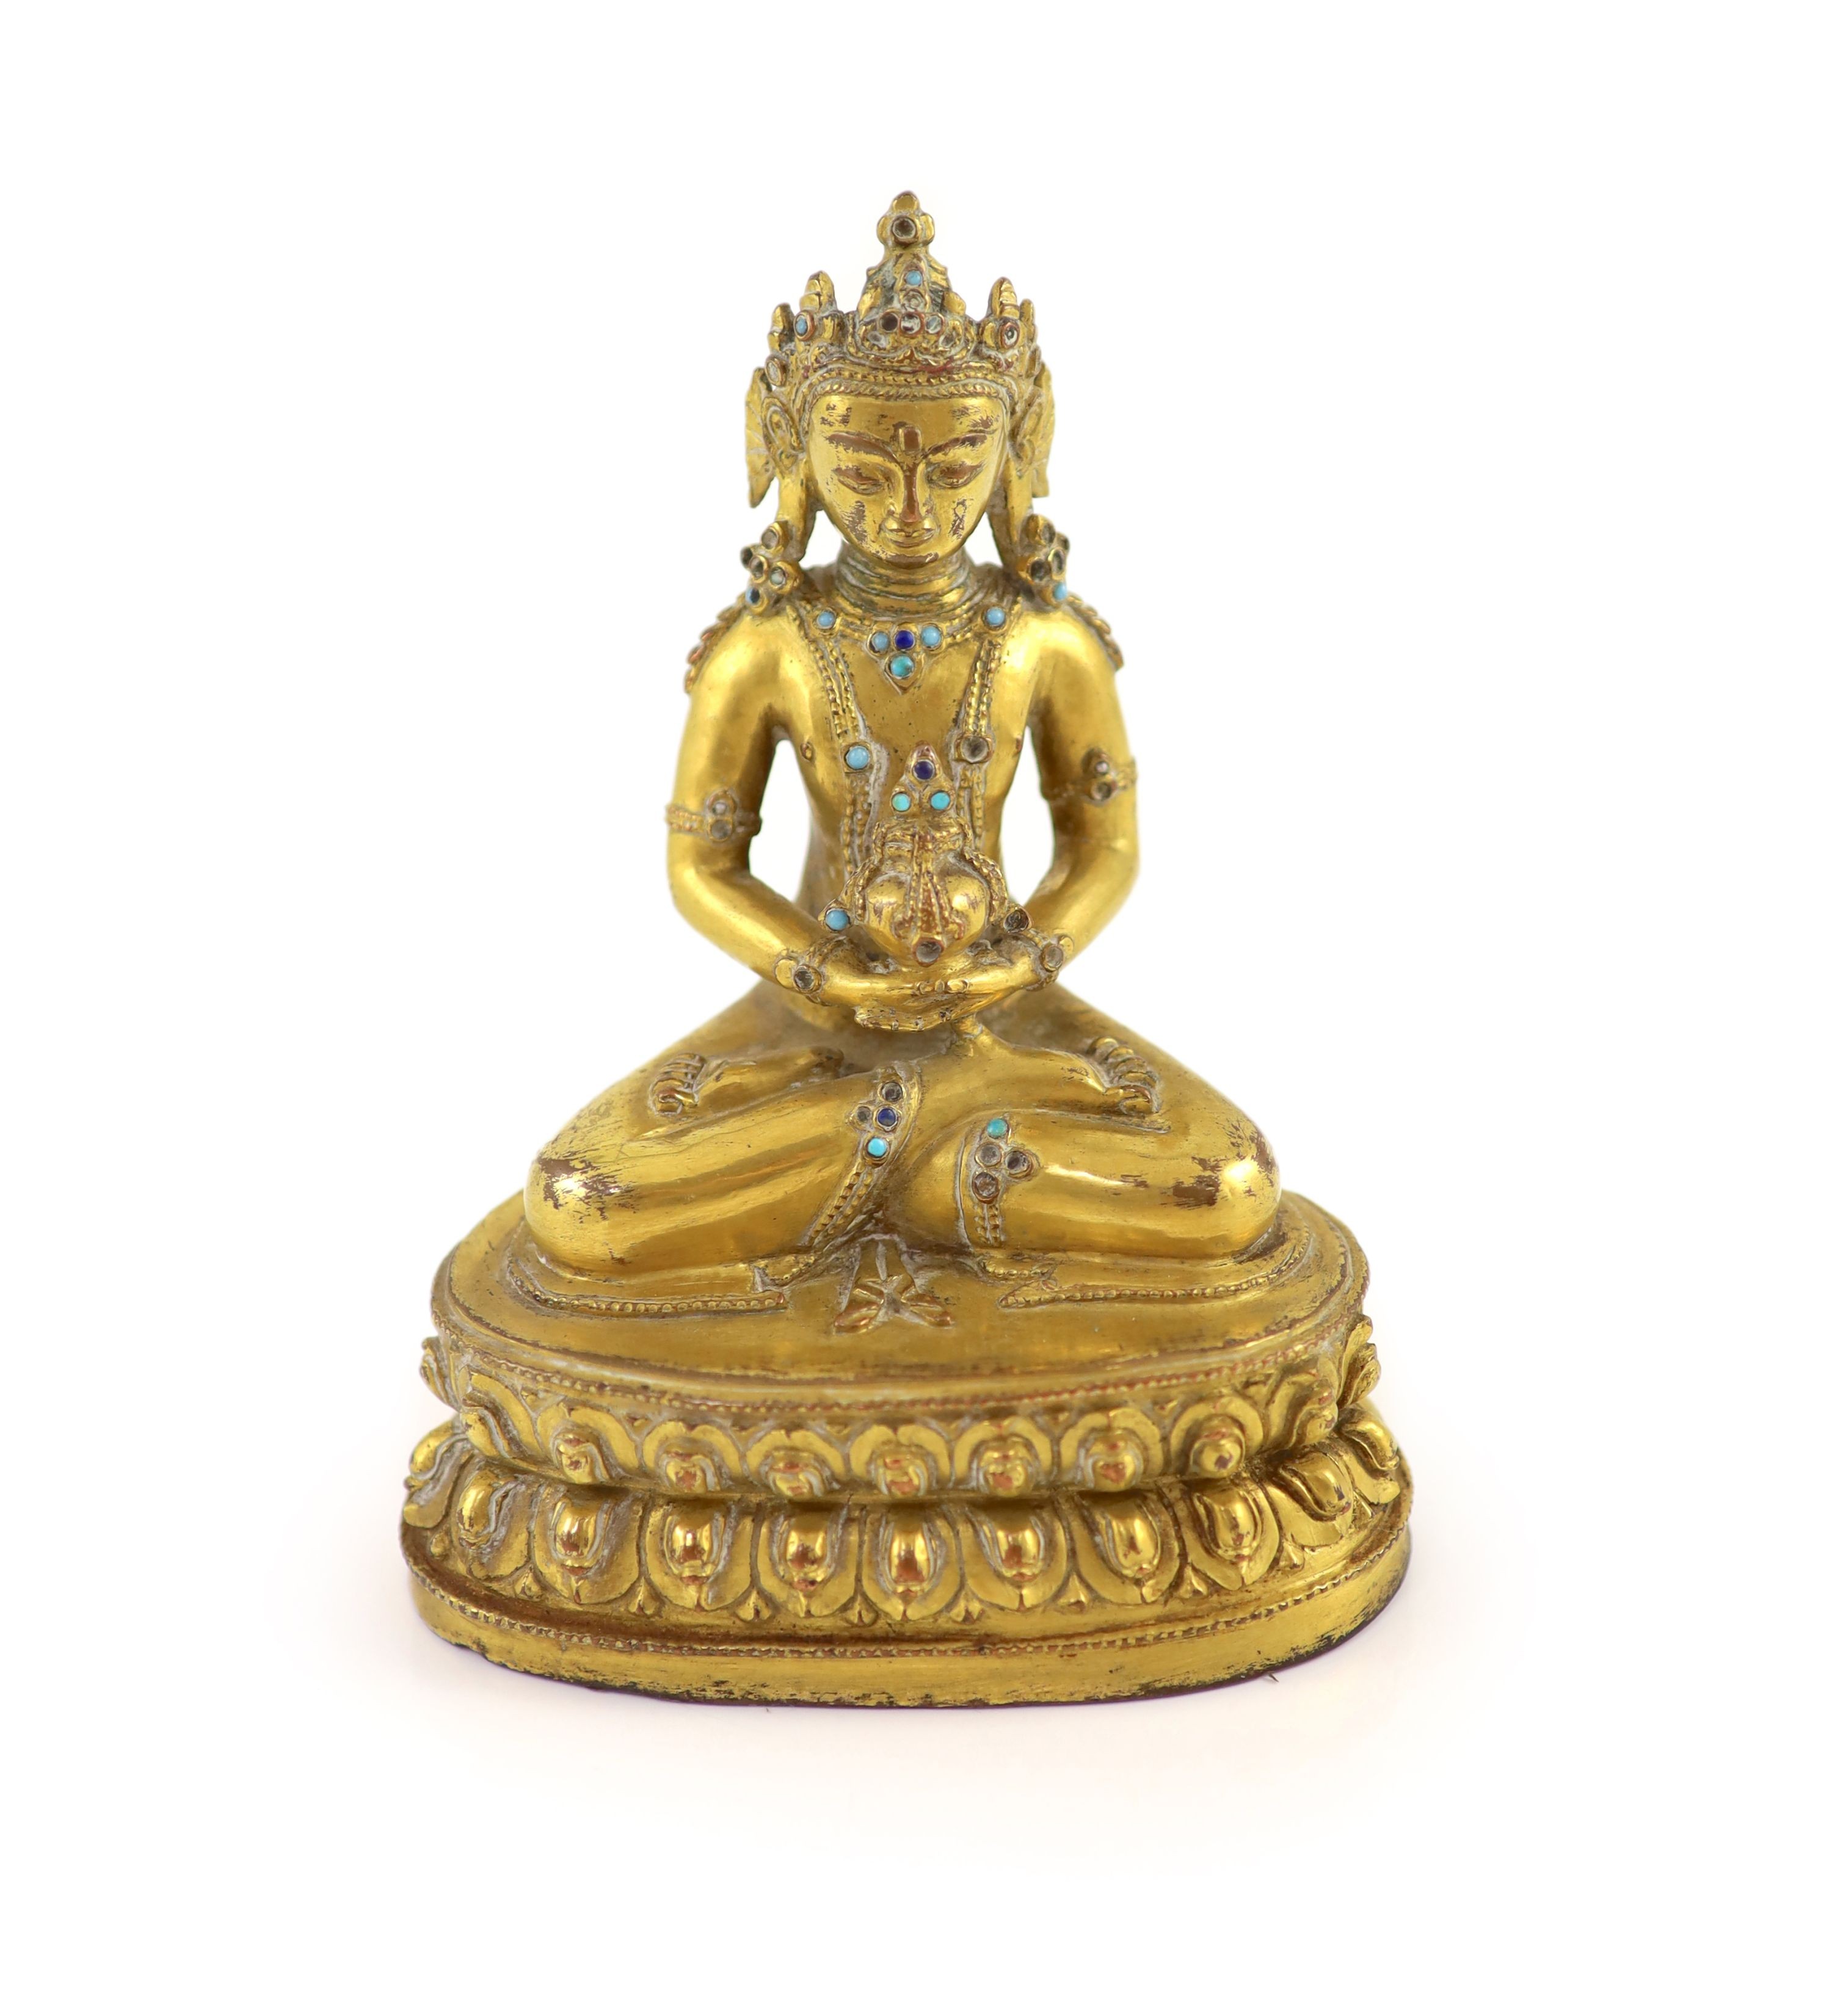 A Tibetan gilt copper alloy seated figure of Amitayus, probably 15th/16th century, 15cm high